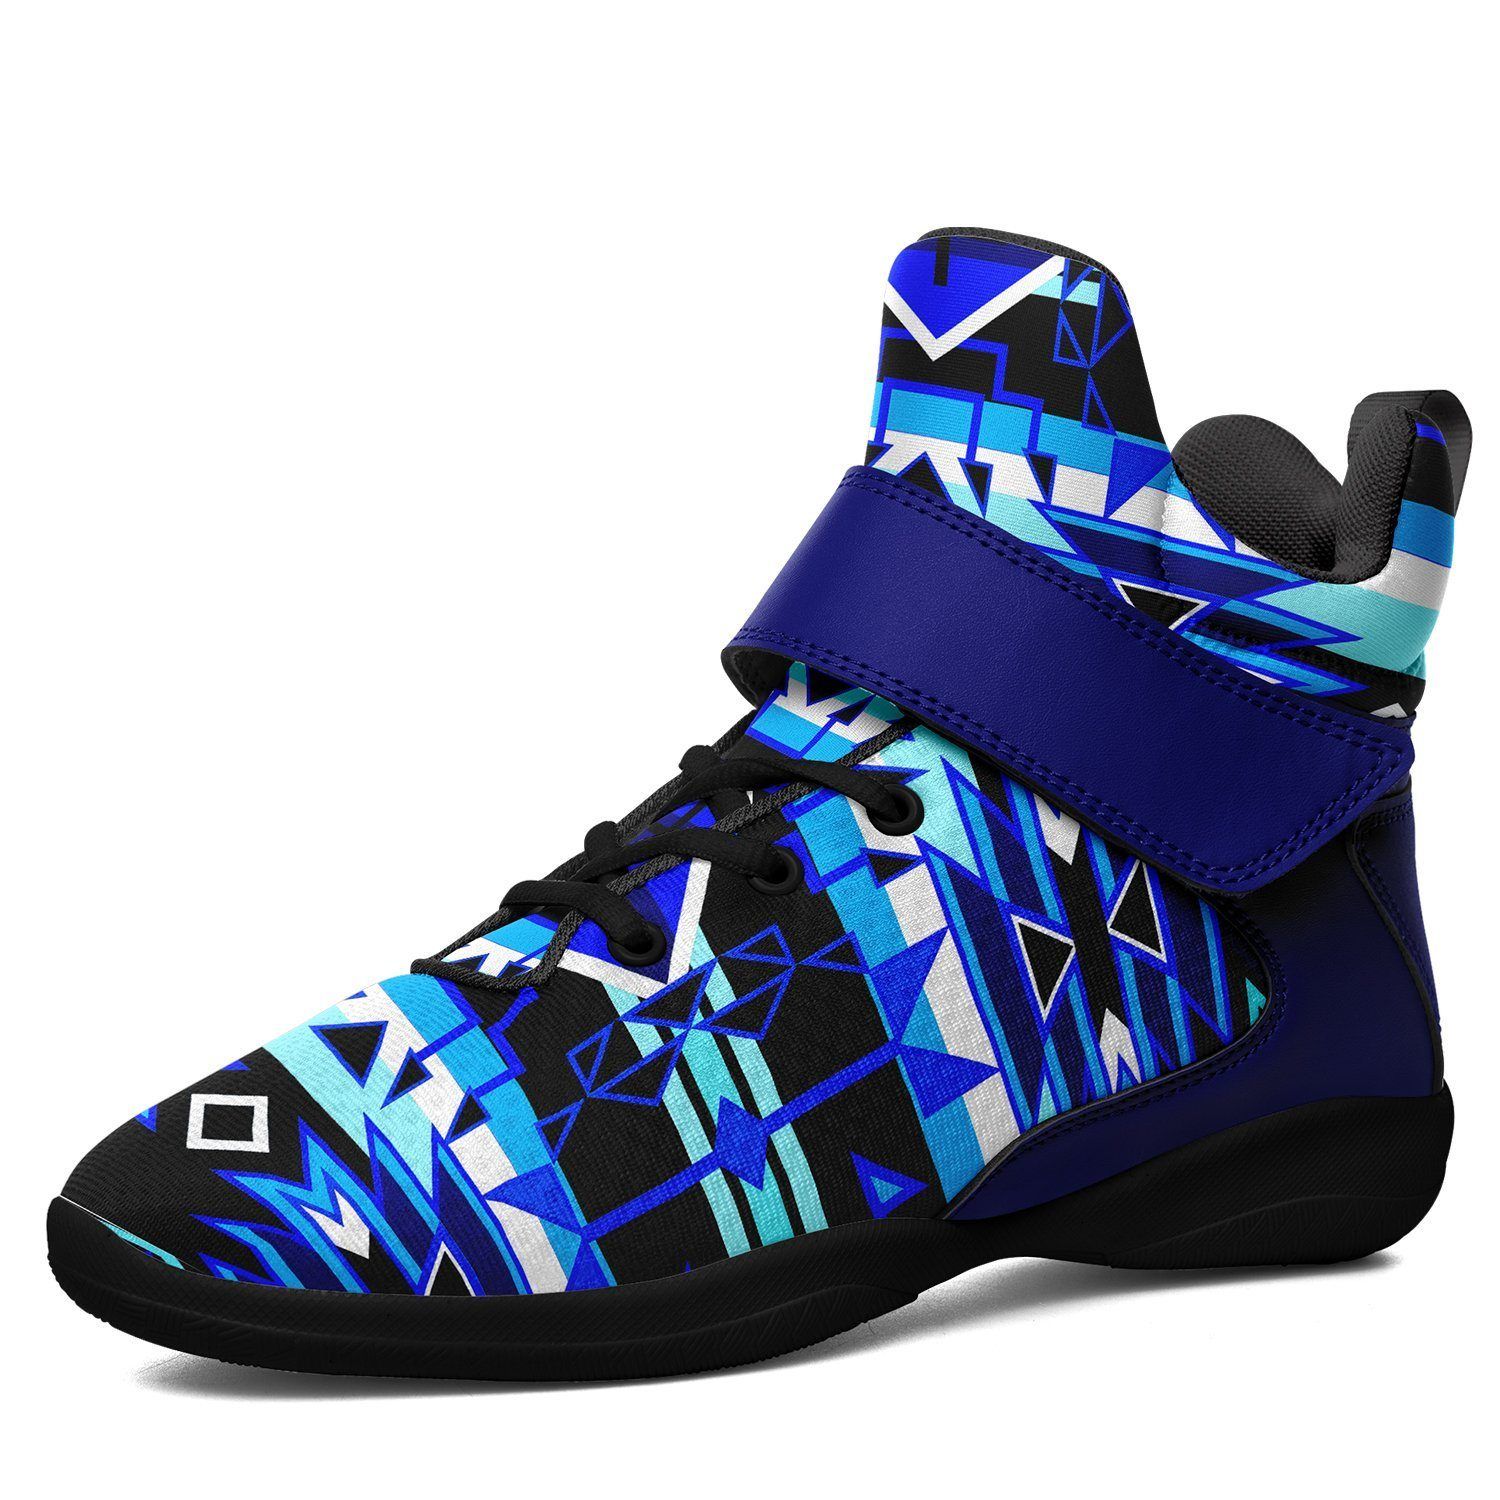 Force of Nature Winter Night Kid's Ipottaa Basketball / Sport High Top Shoes 49 Dzine US Child 12.5 / EUR 30 Black Sole with Blue Strap 